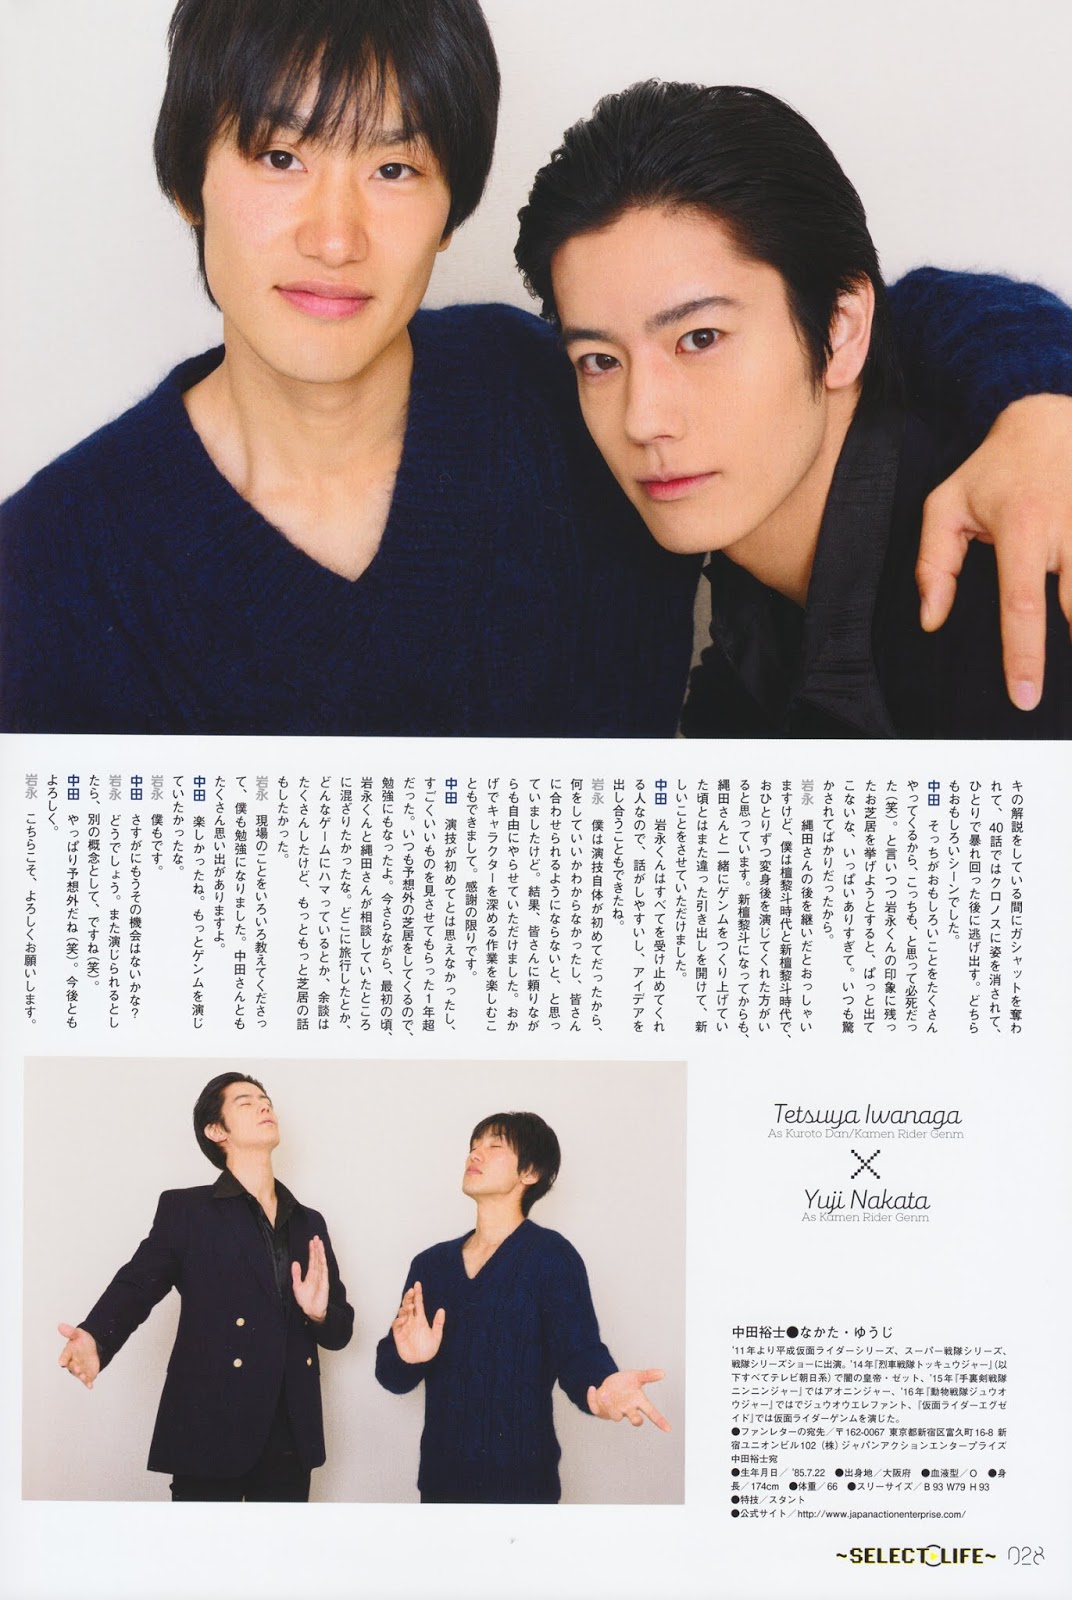 Scanned page of original interview with two photographs of Nakata Yuji and Iwanaga Tetsuya. In the top one Nakata has his arm over Iwanaga's shoulder, in the bottom one they're both doing a half prayer pose with one hand held up to their chest, palm turned outwards, their other arm extended to the side.